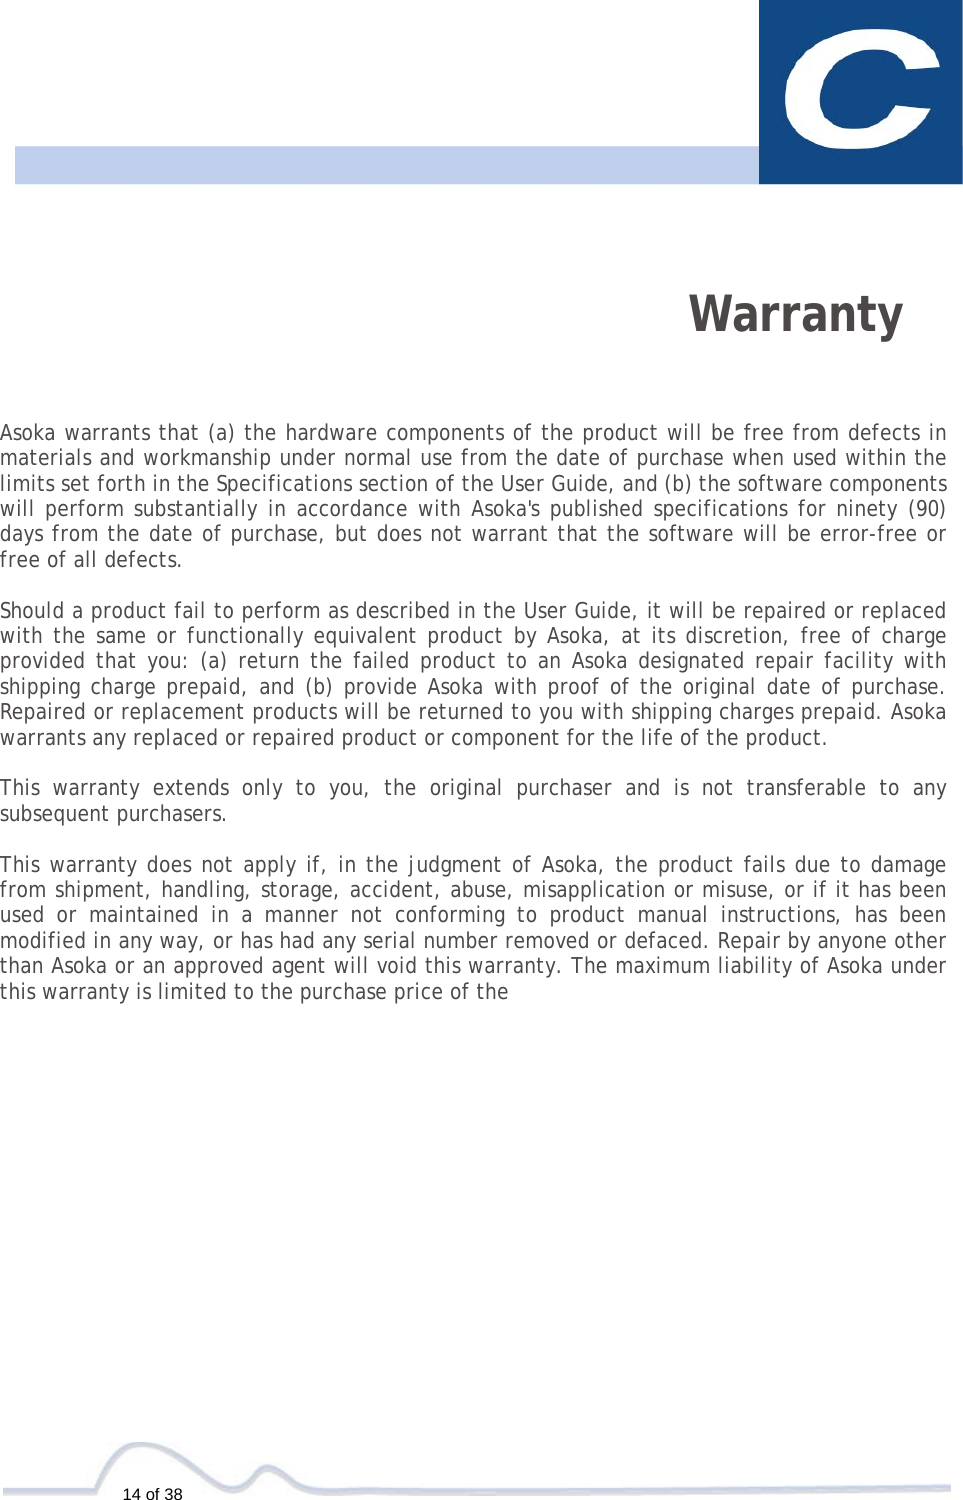   14 of 38    Warranty   Asoka warrants that (a) the hardware components of the product will be free from defects in materials and workmanship under normal use from the date of purchase when used within the limits set forth in the Specifications section of the User Guide, and (b) the software components will perform substantially in accordance with Asoka&apos;s published specifications for ninety (90) days from the date of purchase, but does not warrant that the software will be error-free or free of all defects.  Should a product fail to perform as described in the User Guide, it will be repaired or replaced with the same or functionally equivalent product by Asoka, at its discretion, free of charge provided that you: (a) return the failed product to an Asoka designated repair facility with shipping charge prepaid, and (b) provide Asoka with proof of the original date of purchase. Repaired or replacement products will be returned to you with shipping charges prepaid. Asoka warrants any replaced or repaired product or component for the life of the product.   This warranty extends only to you, the original purchaser and is not transferable to any subsequent purchasers.  This warranty does not apply if, in the judgment of Asoka, the product fails due to damage from shipment, handling, storage, accident, abuse, misapplication or misuse, or if it has been used or maintained in a manner not conforming to product manual instructions, has been modified in any way, or has had any serial number removed or defaced. Repair by anyone other than Asoka or an approved agent will void this warranty. The maximum liability of Asoka under this warranty is limited to the purchase price of the